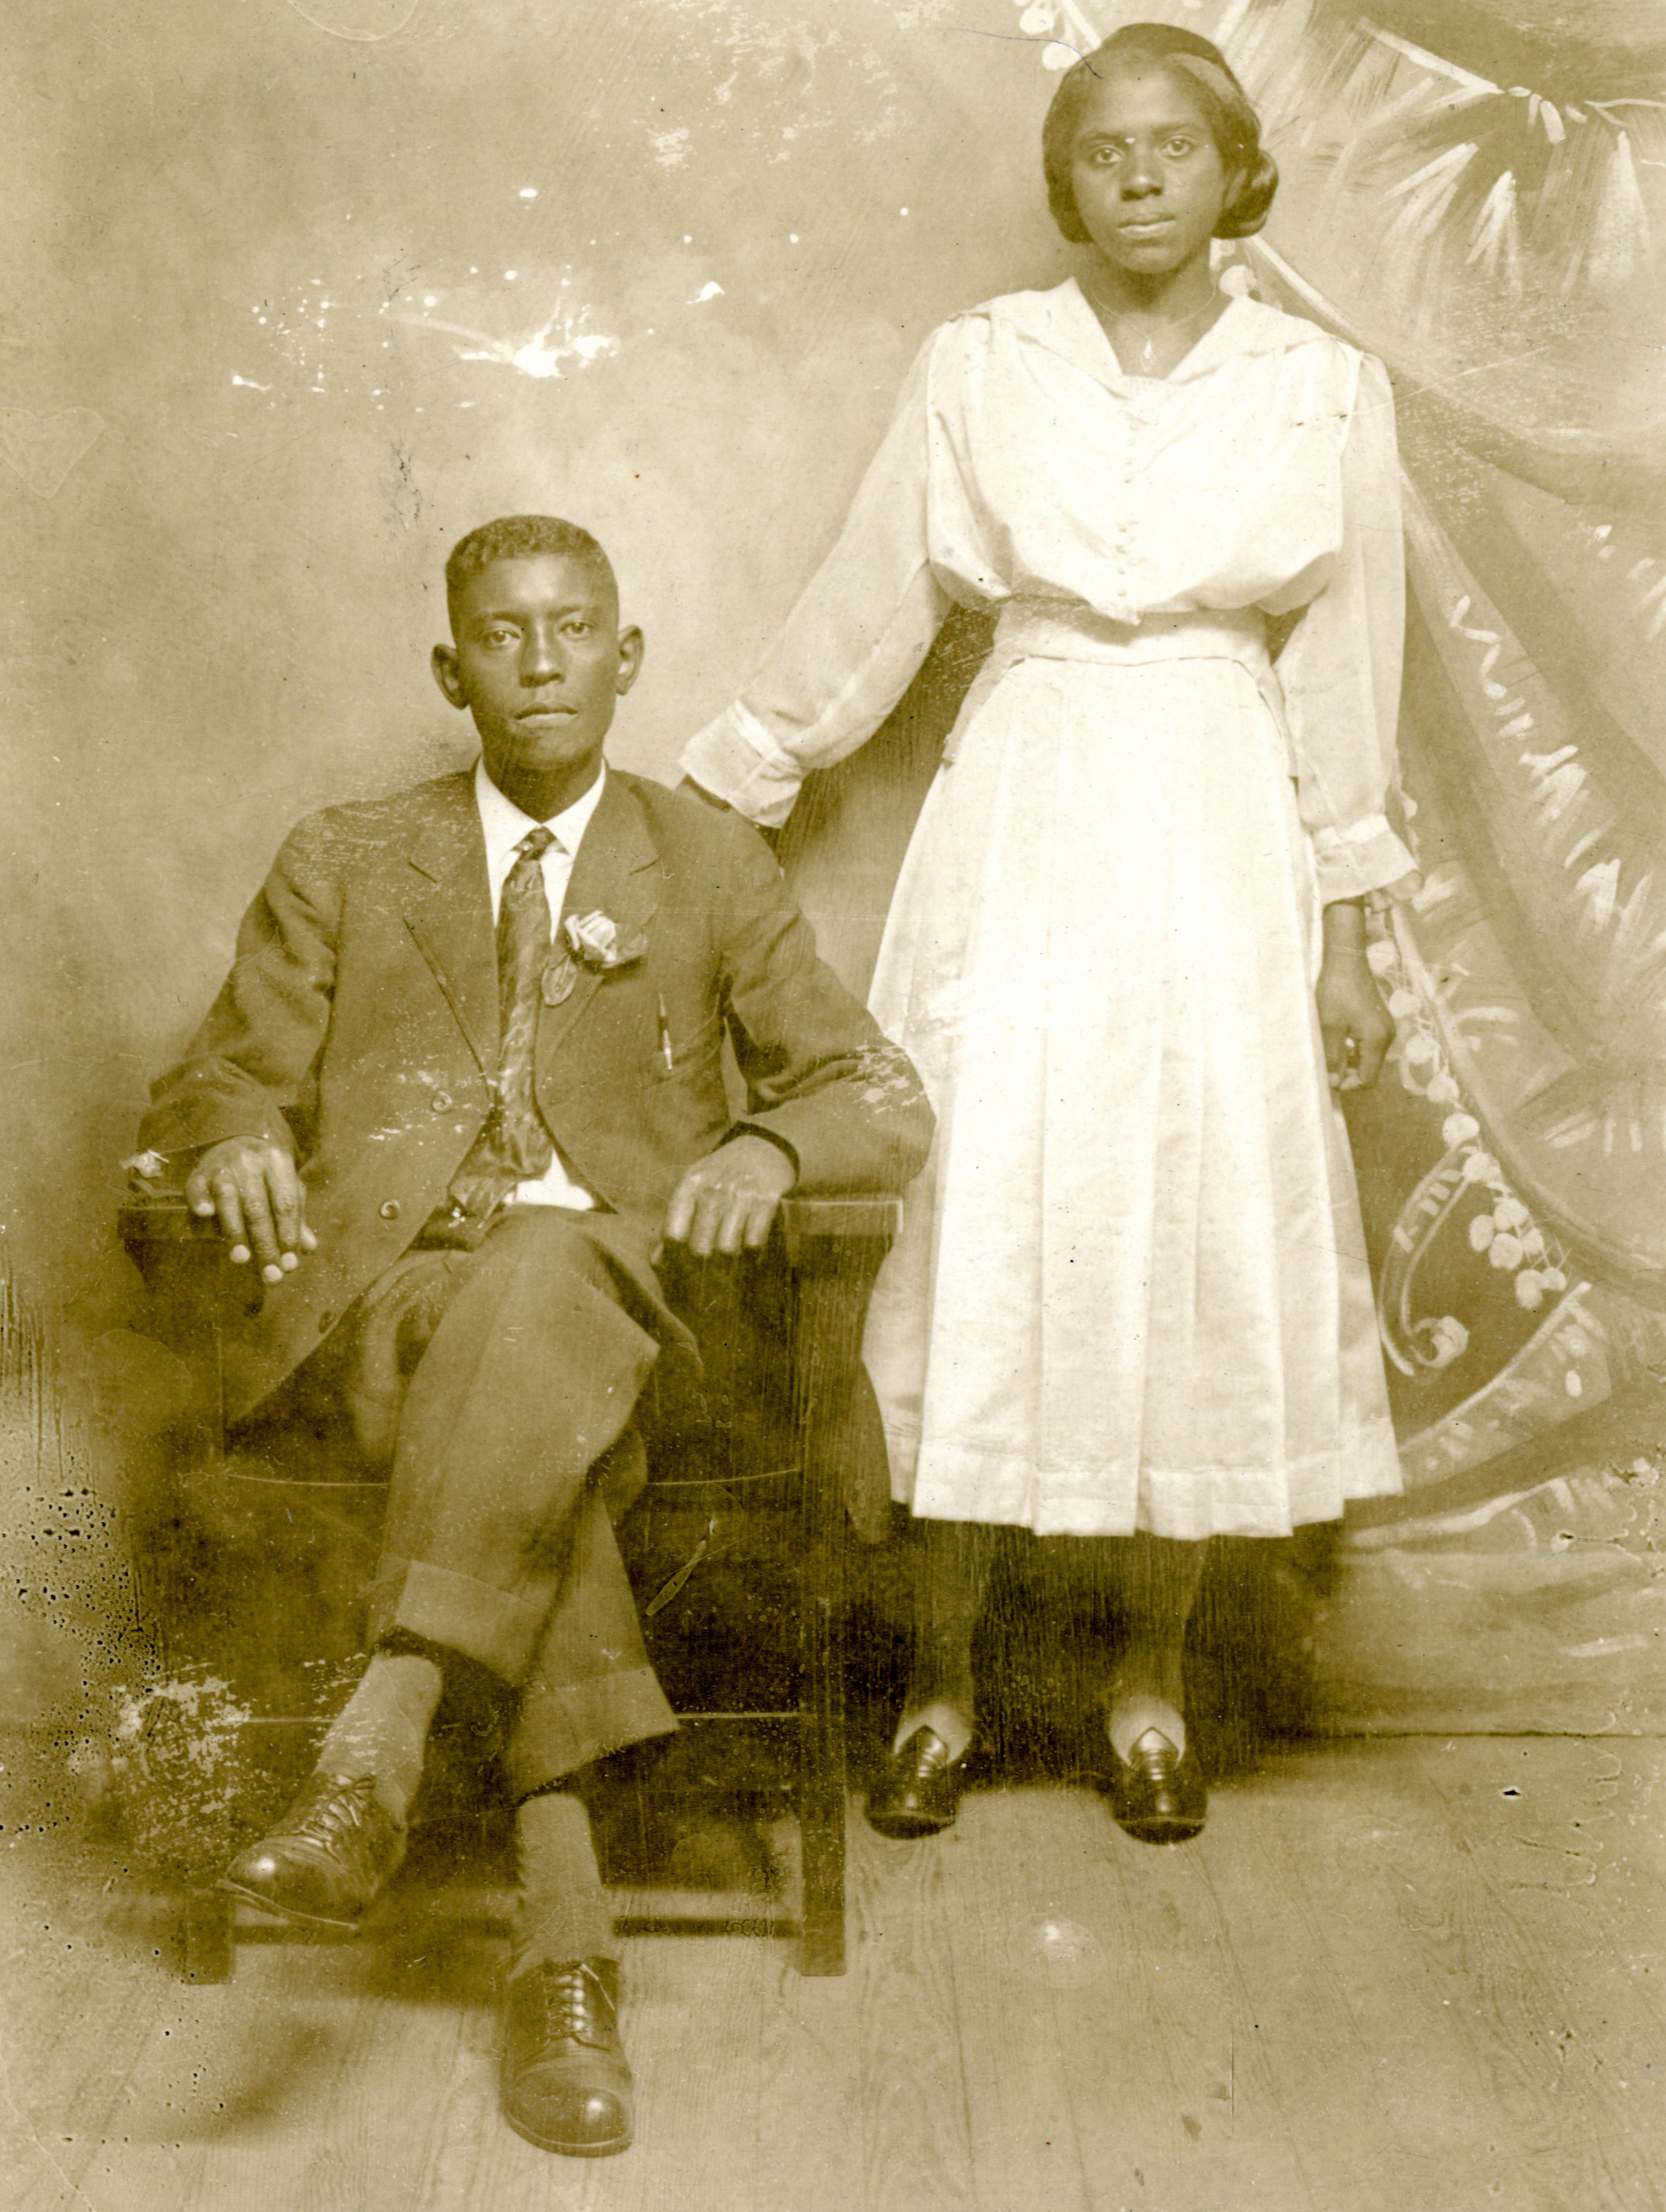 What Black Love Looked Liked From the 1800s to the Present
